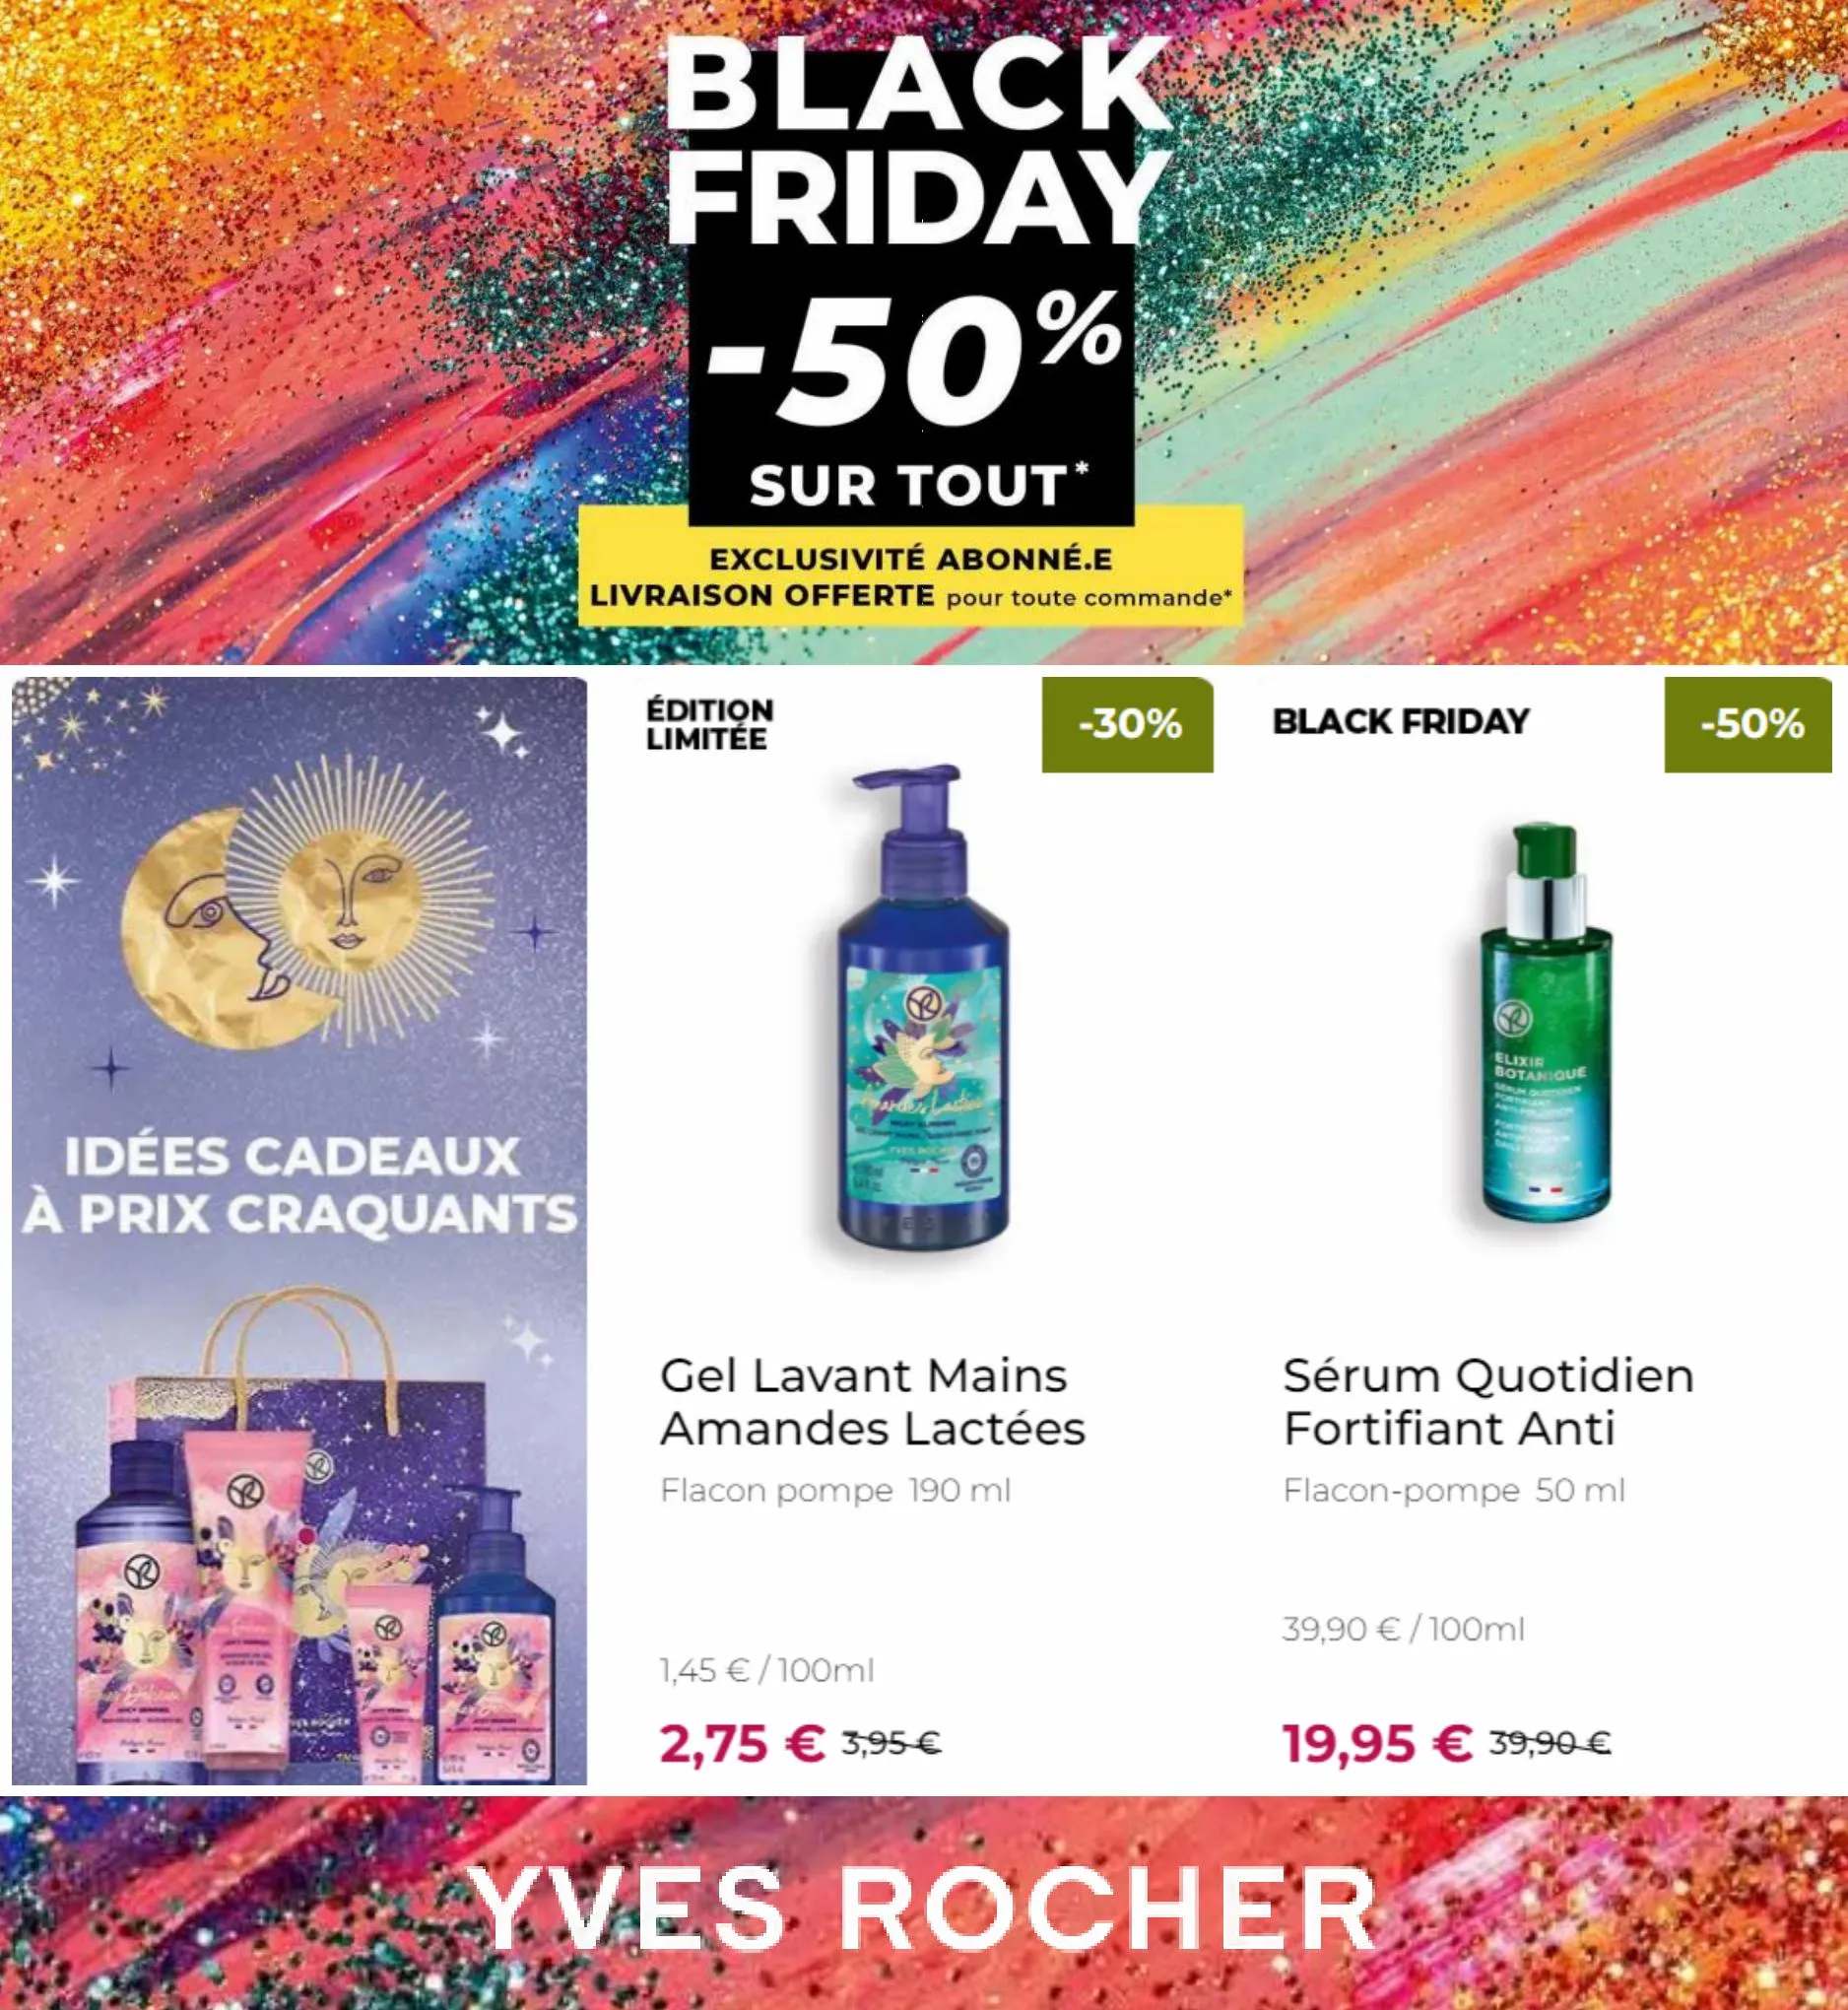 Catalogue Yves Rocher Black Friday, page 00007